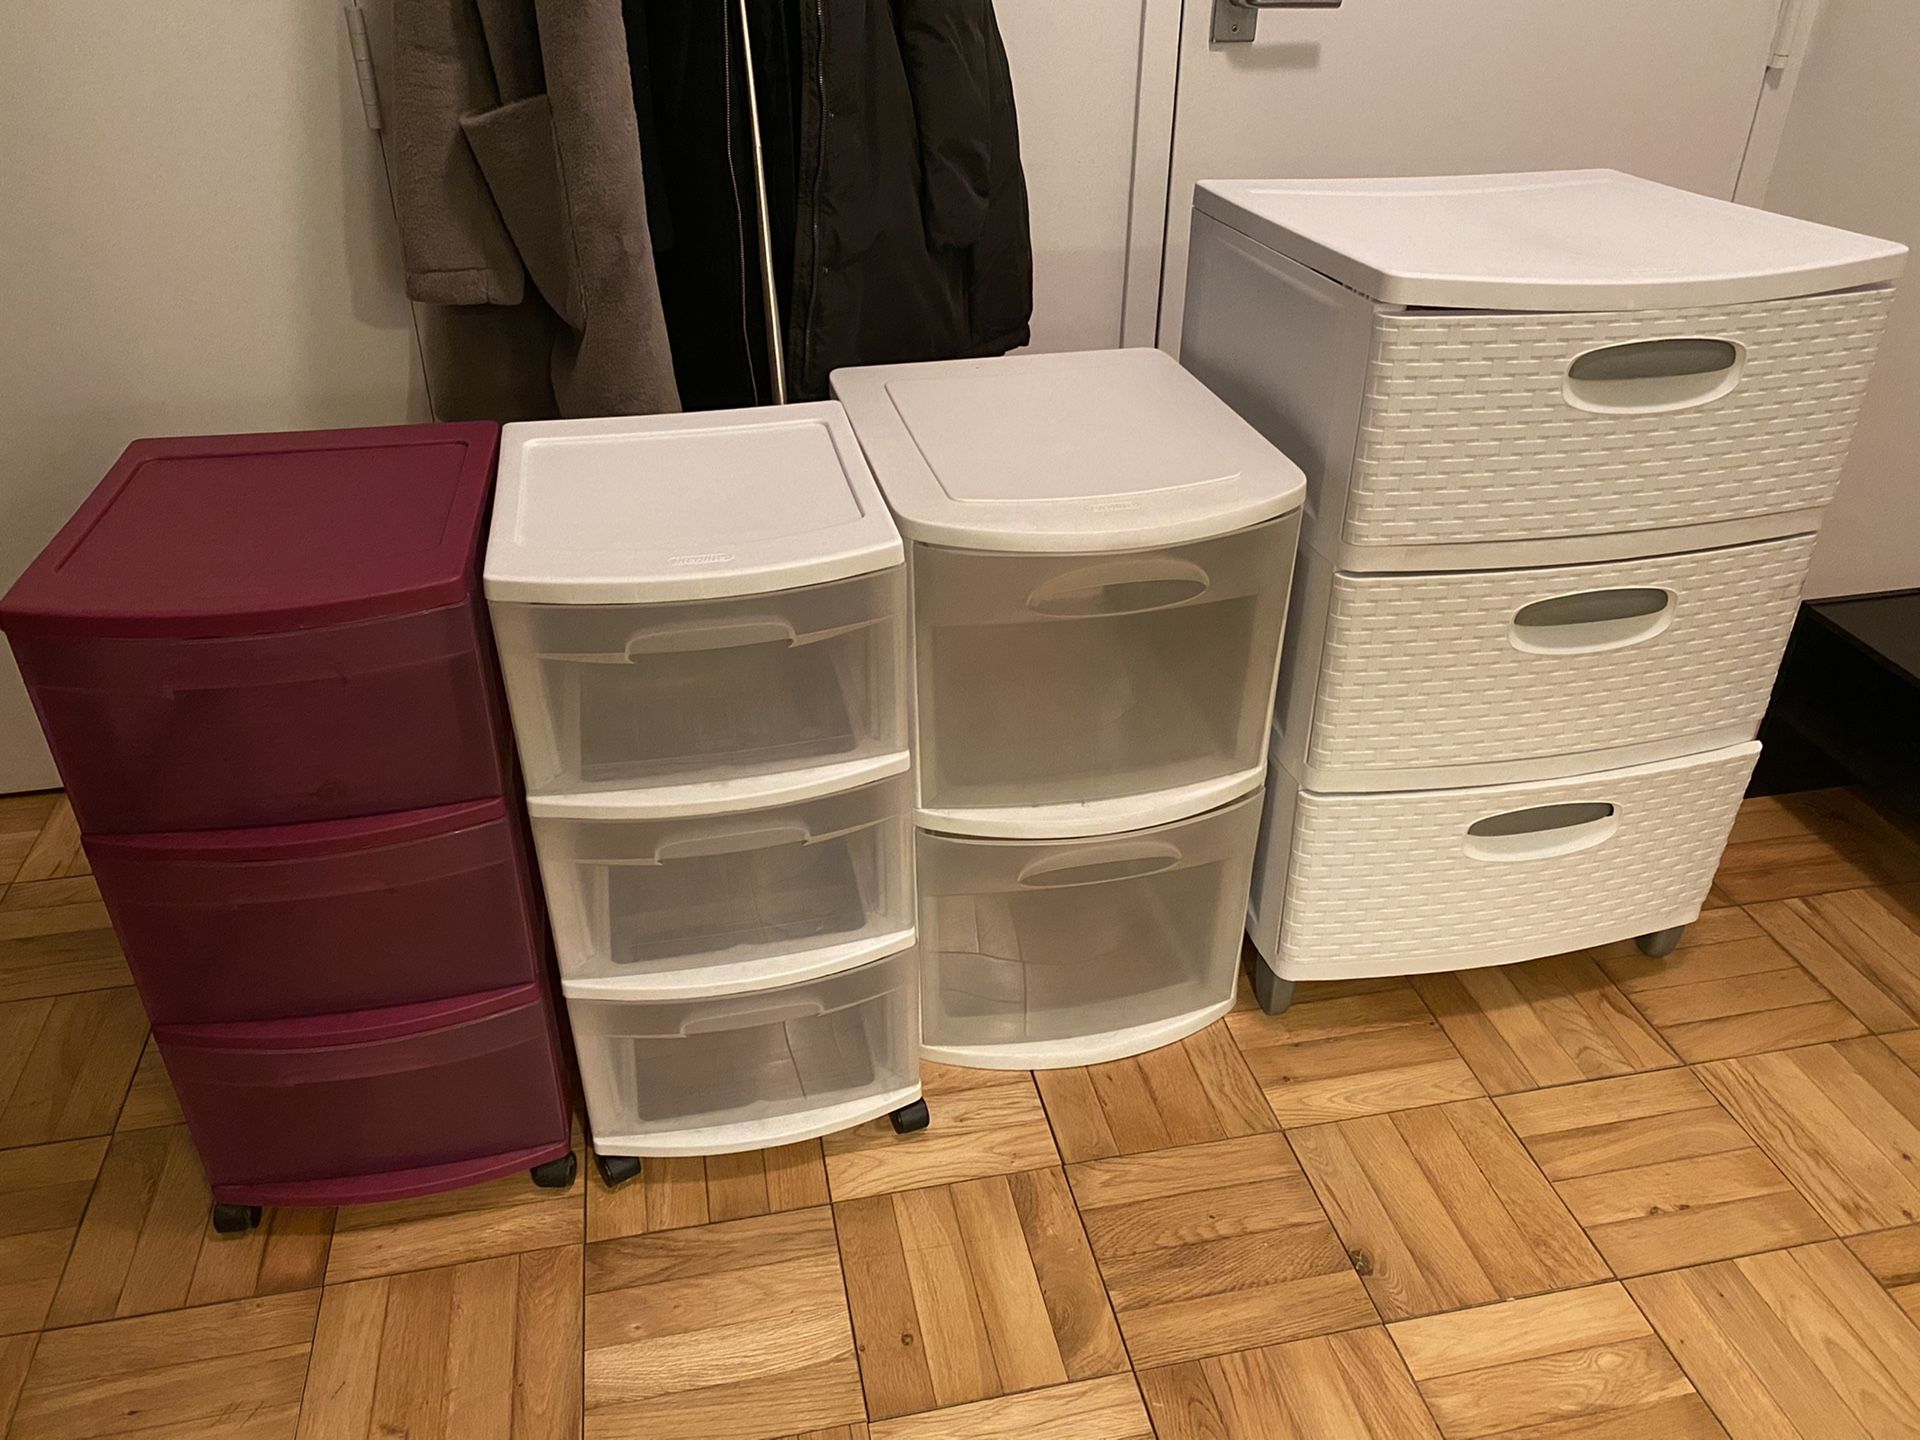 Selling plastic drawers! $5 for small / $10 for big